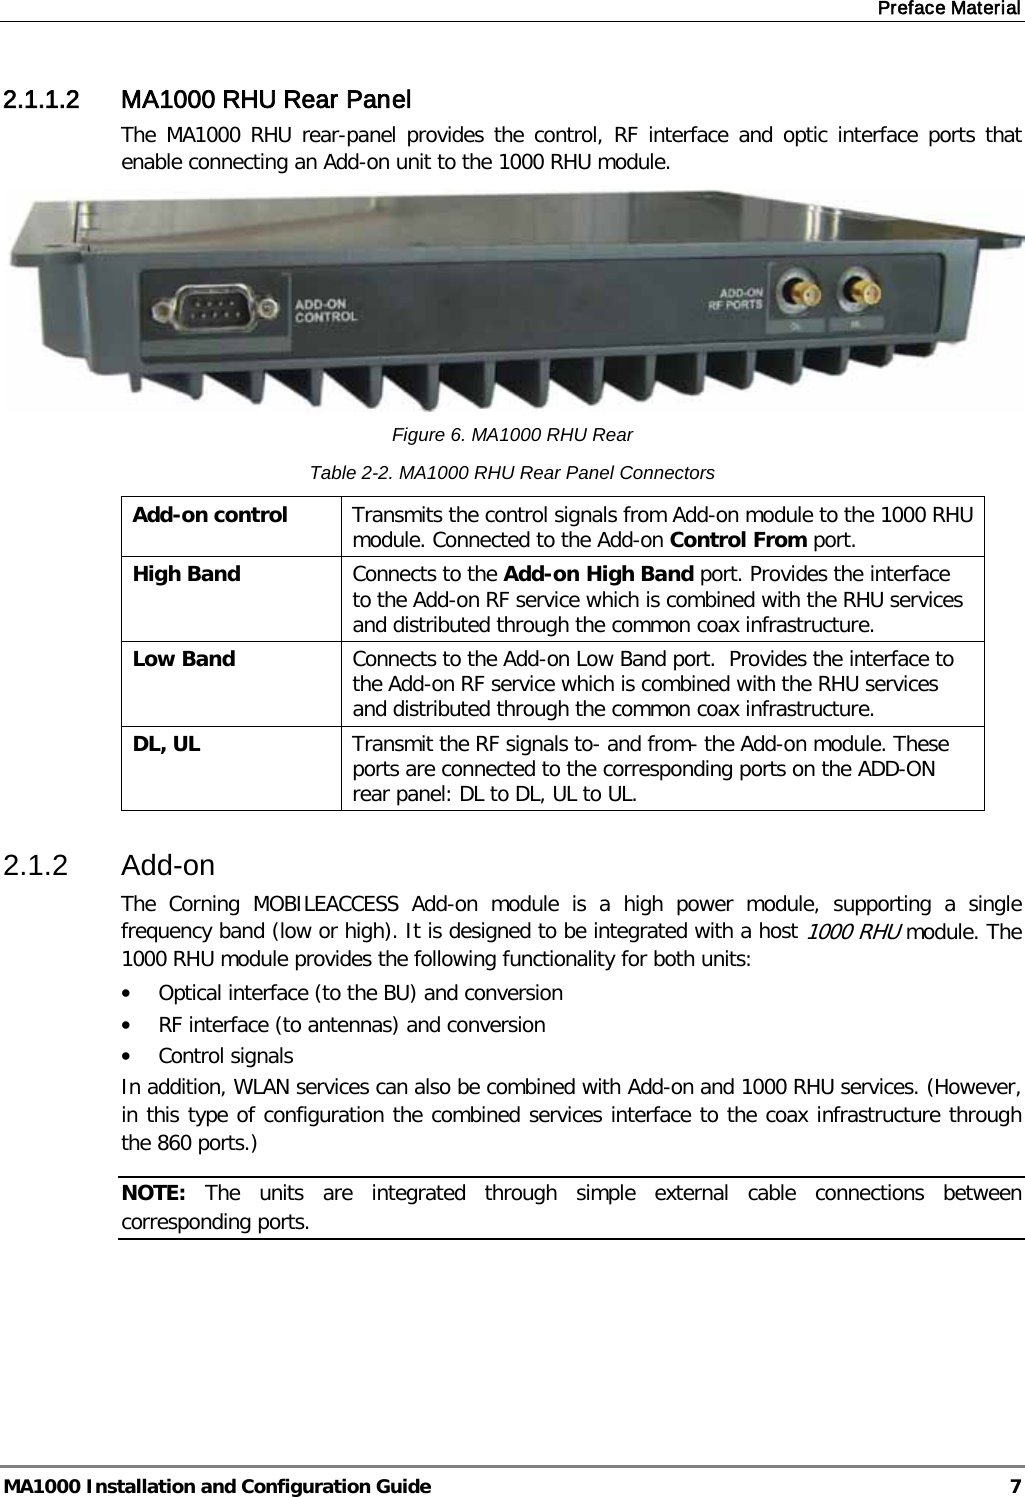 Preface Material  MA1000 Installation and Configuration Guide  7 2.1.1.2 MA1000 RHU Rear Panel The MA1000 RHU rear-panel provides the control, RF interface and optic interface ports that enable connecting an Add-on unit to the 1000 RHU module.   Figure 6. MA1000 RHU Rear Table  2-2. MA1000 RHU Rear Panel Connectors Add-on control Transmits the control signals from Add-on module to the 1000 RHU module. Connected to the Add-on Control From port.  High Band Connects to the Add-on High Band port. Provides the interface to the Add-on RF service which is combined with the RHU services and distributed through the common coax infrastructure.  Low Band Connects to the Add-on Low Band port.  Provides the interface to the Add-on RF service which is combined with the RHU services and distributed through the common coax infrastructure. DL, UL Transmit the RF signals to- and from- the Add-on module. These ports are connected to the corresponding ports on the ADD-ON rear panel: DL to DL, UL to UL. 2.1.2  Add-on The  Corning MOBILEACCESS Add-on module is a high power module, supporting a single frequency band (low or high). It is designed to be integrated with a host 1000 RHU module. The 1000 RHU module provides the following functionality for both units: • Optical interface (to the BU) and conversion • RF interface (to antennas) and conversion • Control signals  In addition, WLAN services can also be combined with Add-on and 1000 RHU services. (However, in this type of configuration the combined services interface to the coax infrastructure through the 860 ports.) NOTE:  The units are integrated through simple external cable connections between corresponding ports. 